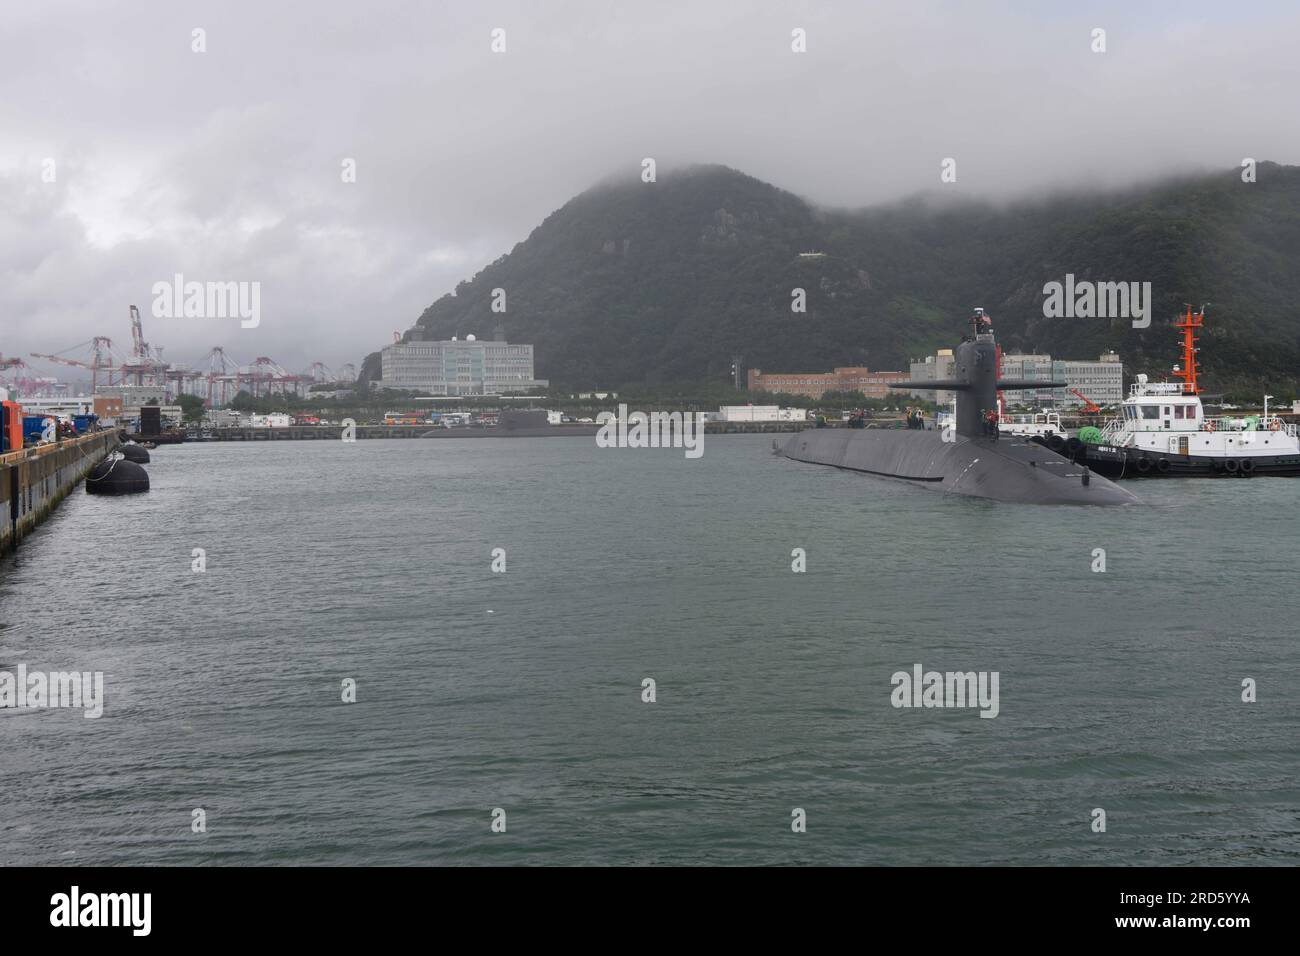 230718-N-ZU710-0125 BUSAN, Republic of Korea (July 18, 2023) - The Ohio-class ballistic-missile submarine USS Kentucky (SSBN 737) pulls into port in Busan. Homeported in Naval Base Kitsap, Bangor, Washington, Kentucky is a launch platform for submarine-launched ballistic missiles, providing the United States with its most survivable leg of the nuclear triad. The visit represents the United States’ ironclad commitment to the Republic of Korea (ROK) for its extended deterrence guarantee, and compliments the many exercises, training, operations, and other military cooperation activities conducted Stock Photo